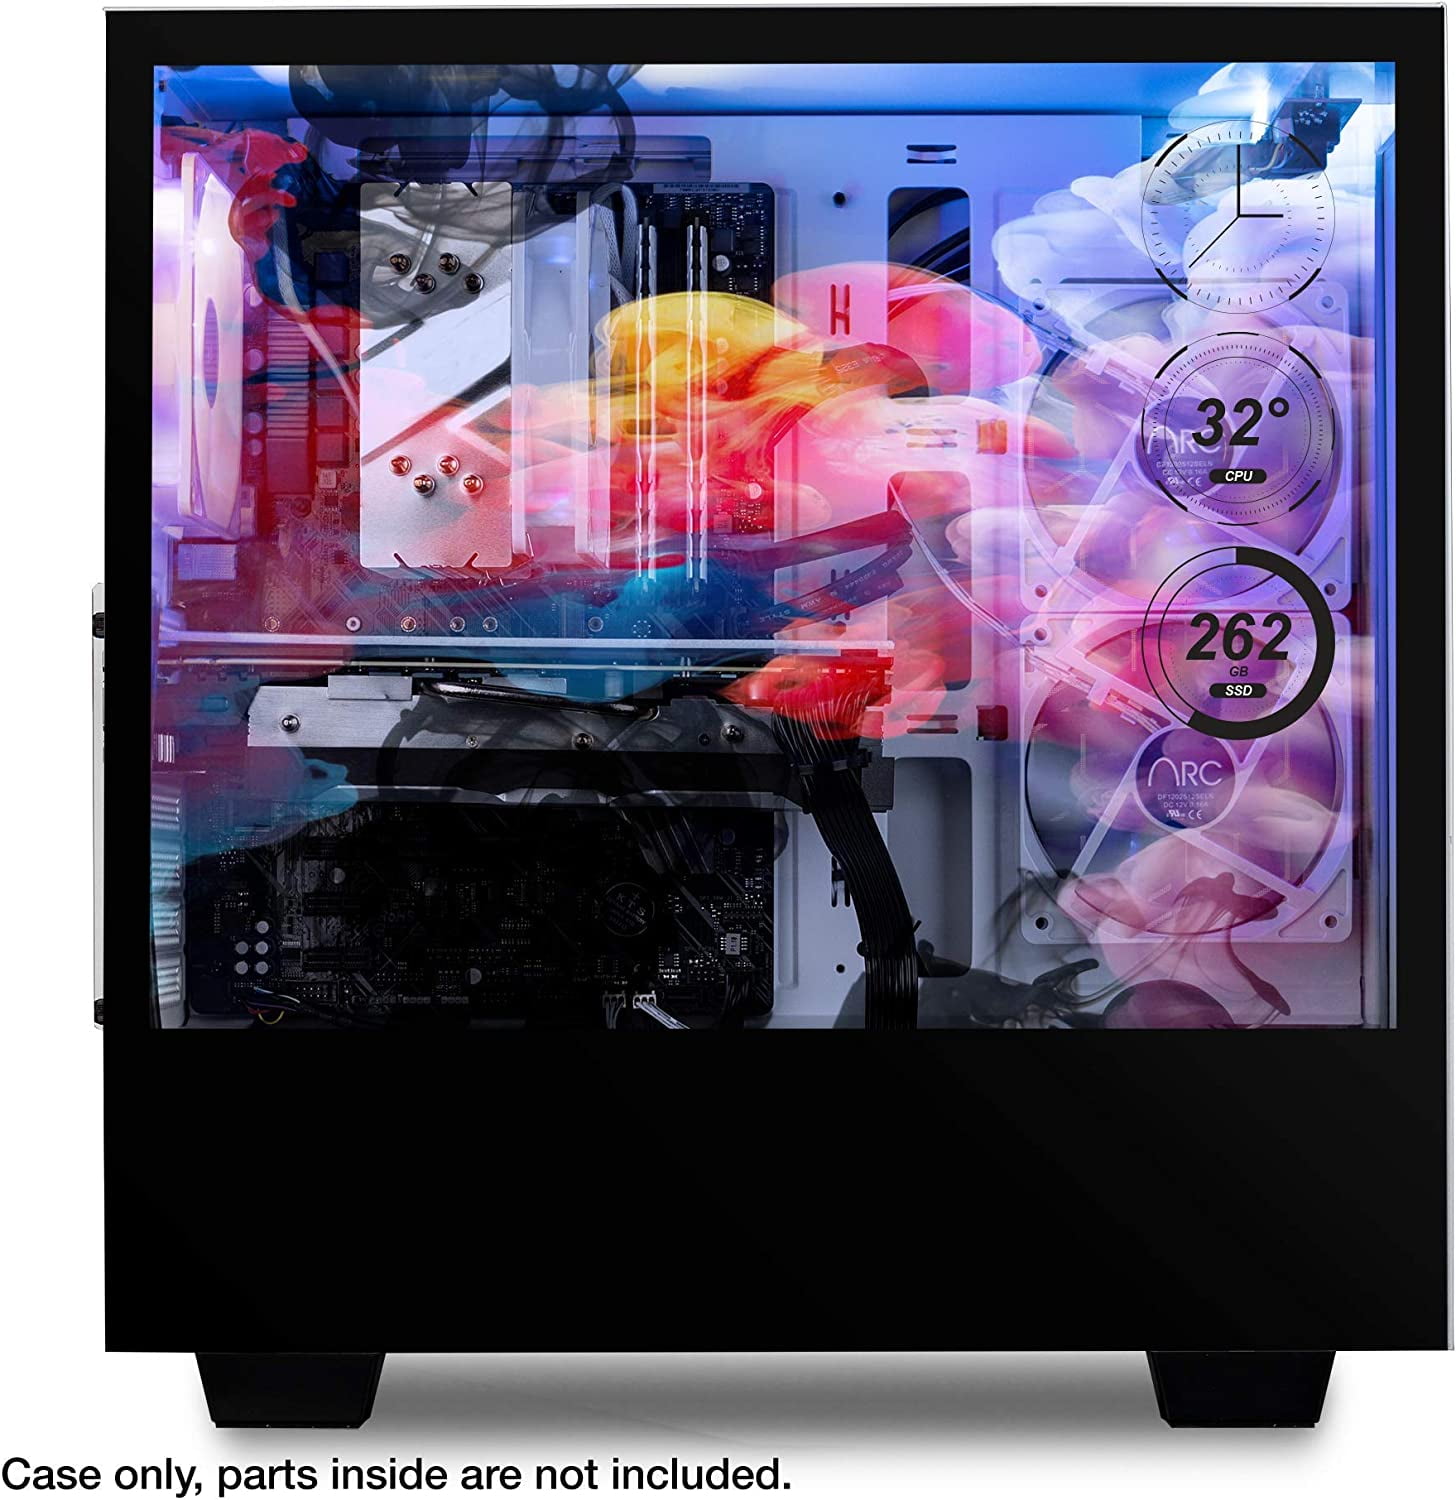 iBUYPOWER Snowblind S 19 Translucent Customizable Side-Panel LCD Display  1280 x 1024 Resolution Mid-Tower Desktop Computer Gaming Case 3 x 120